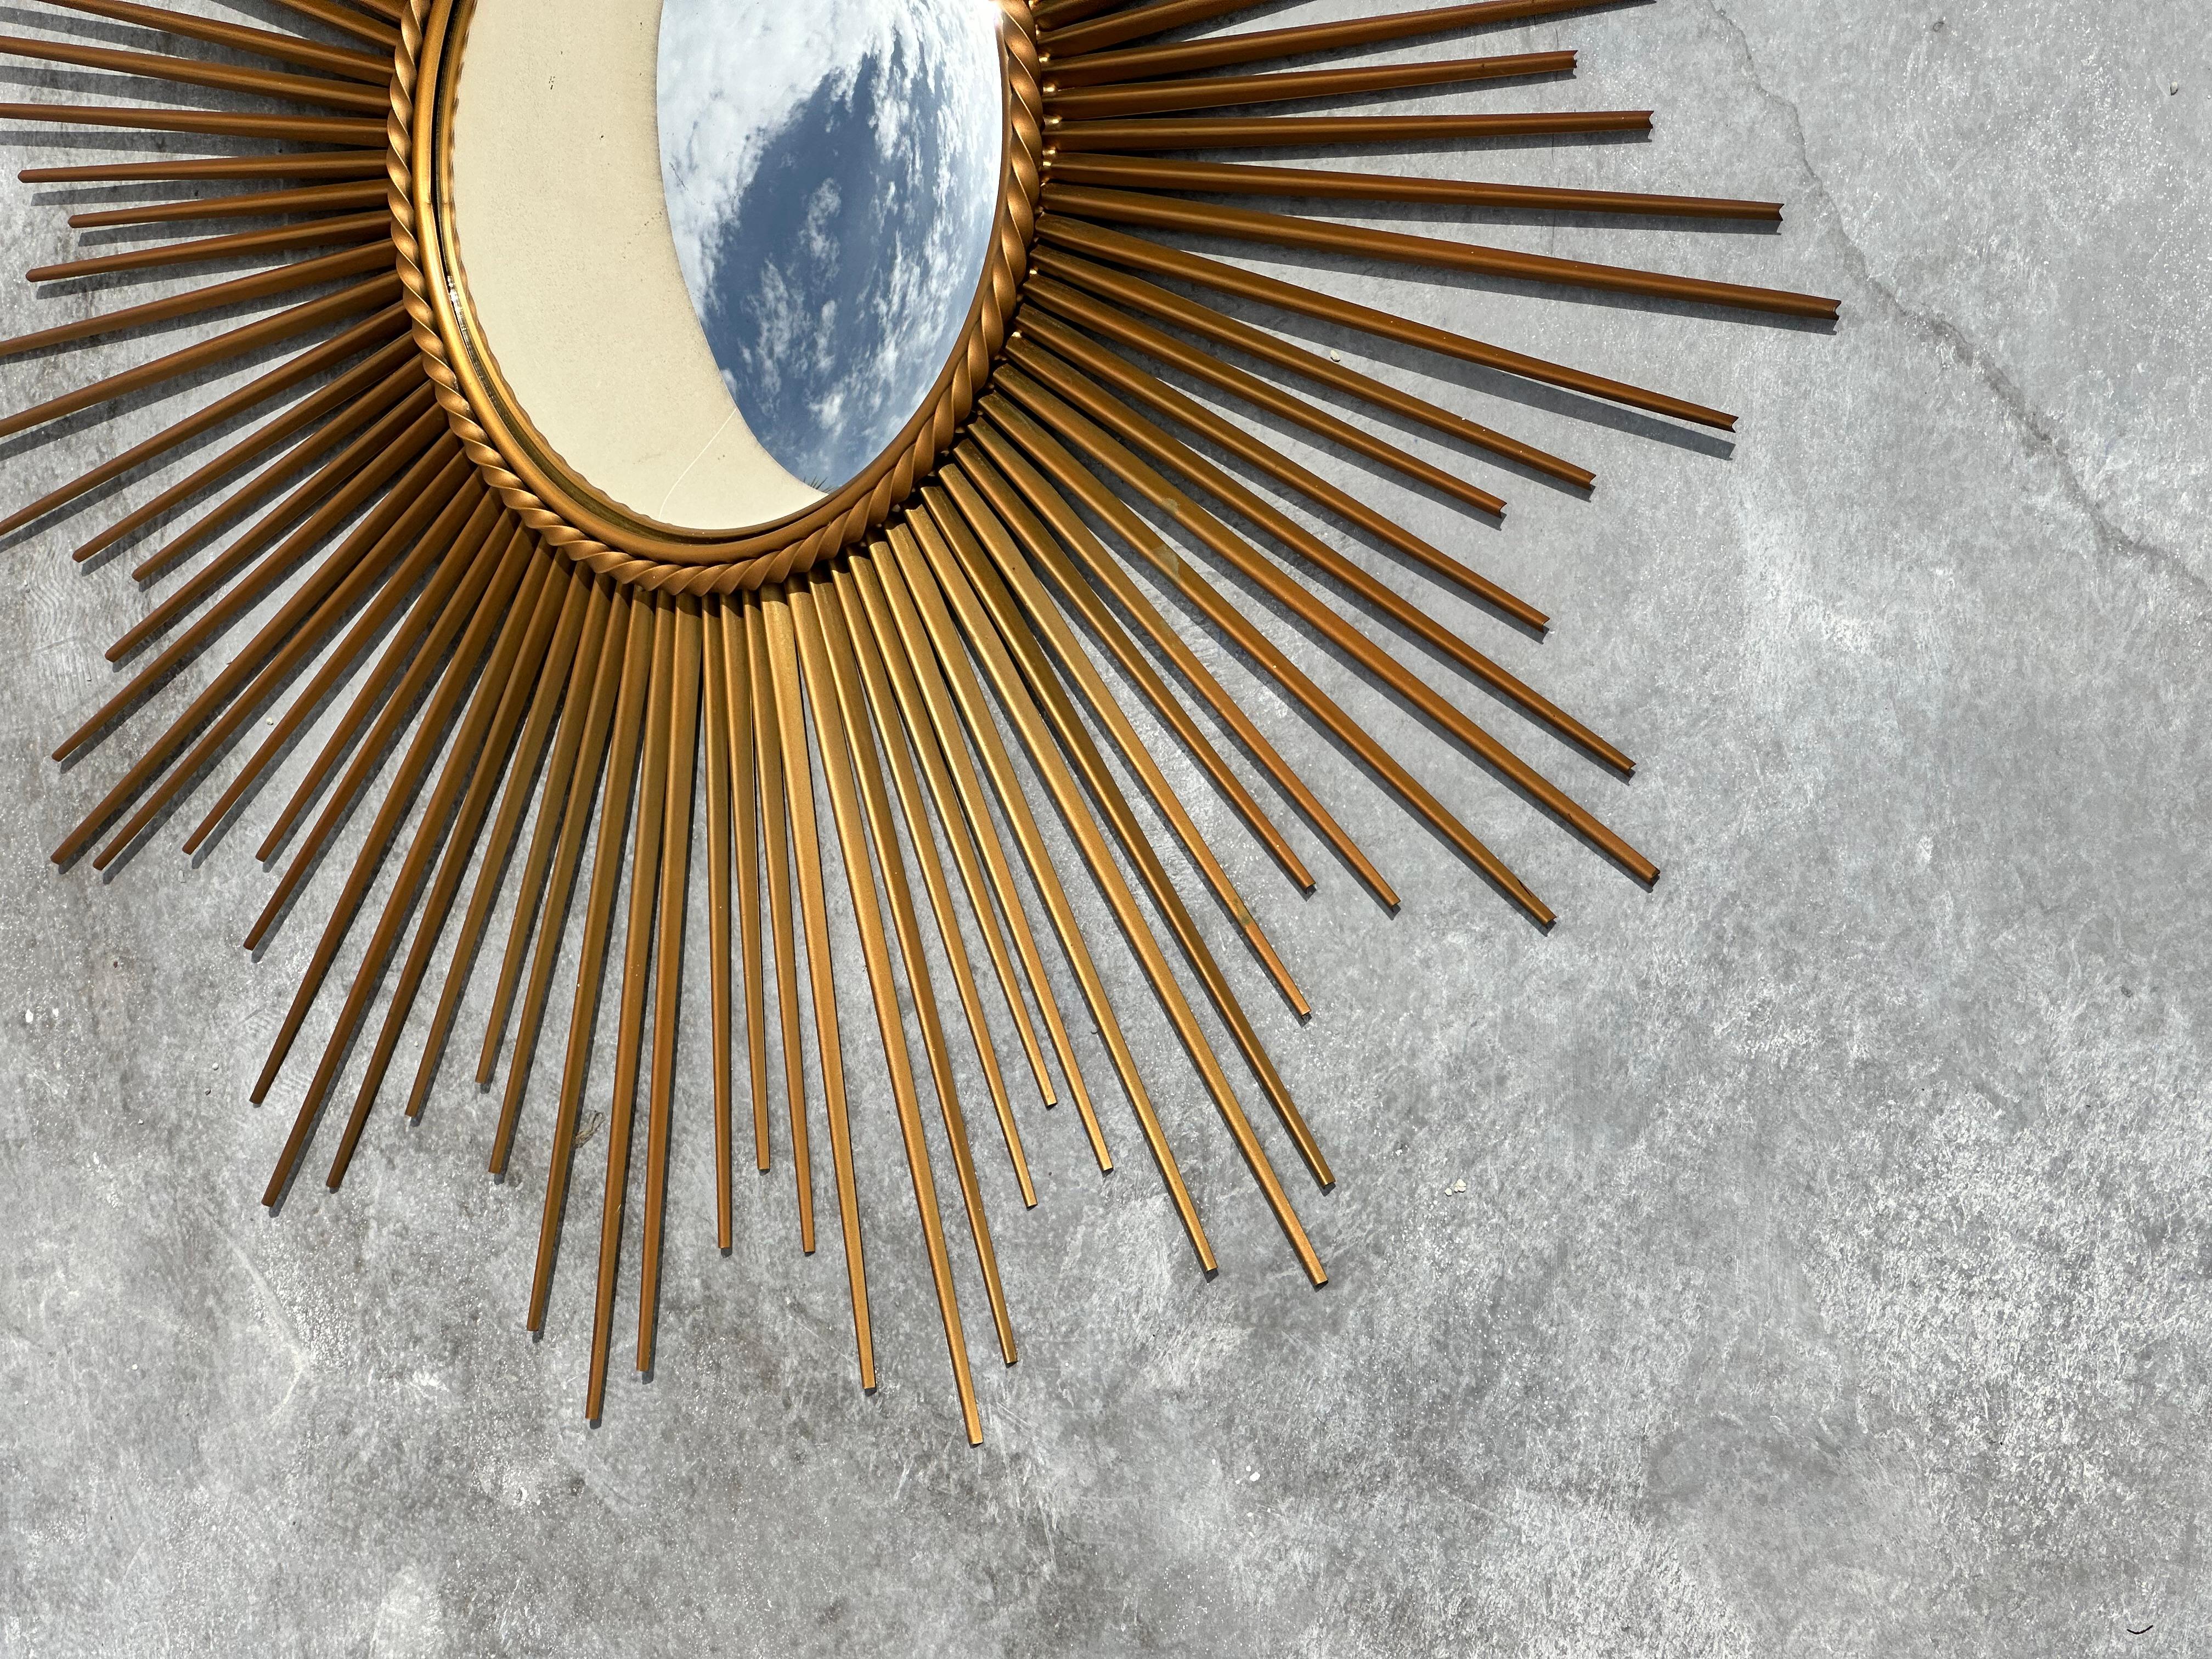 French Provincial François Chaty in Vallauris, design Sunburst mirror, france 1960s